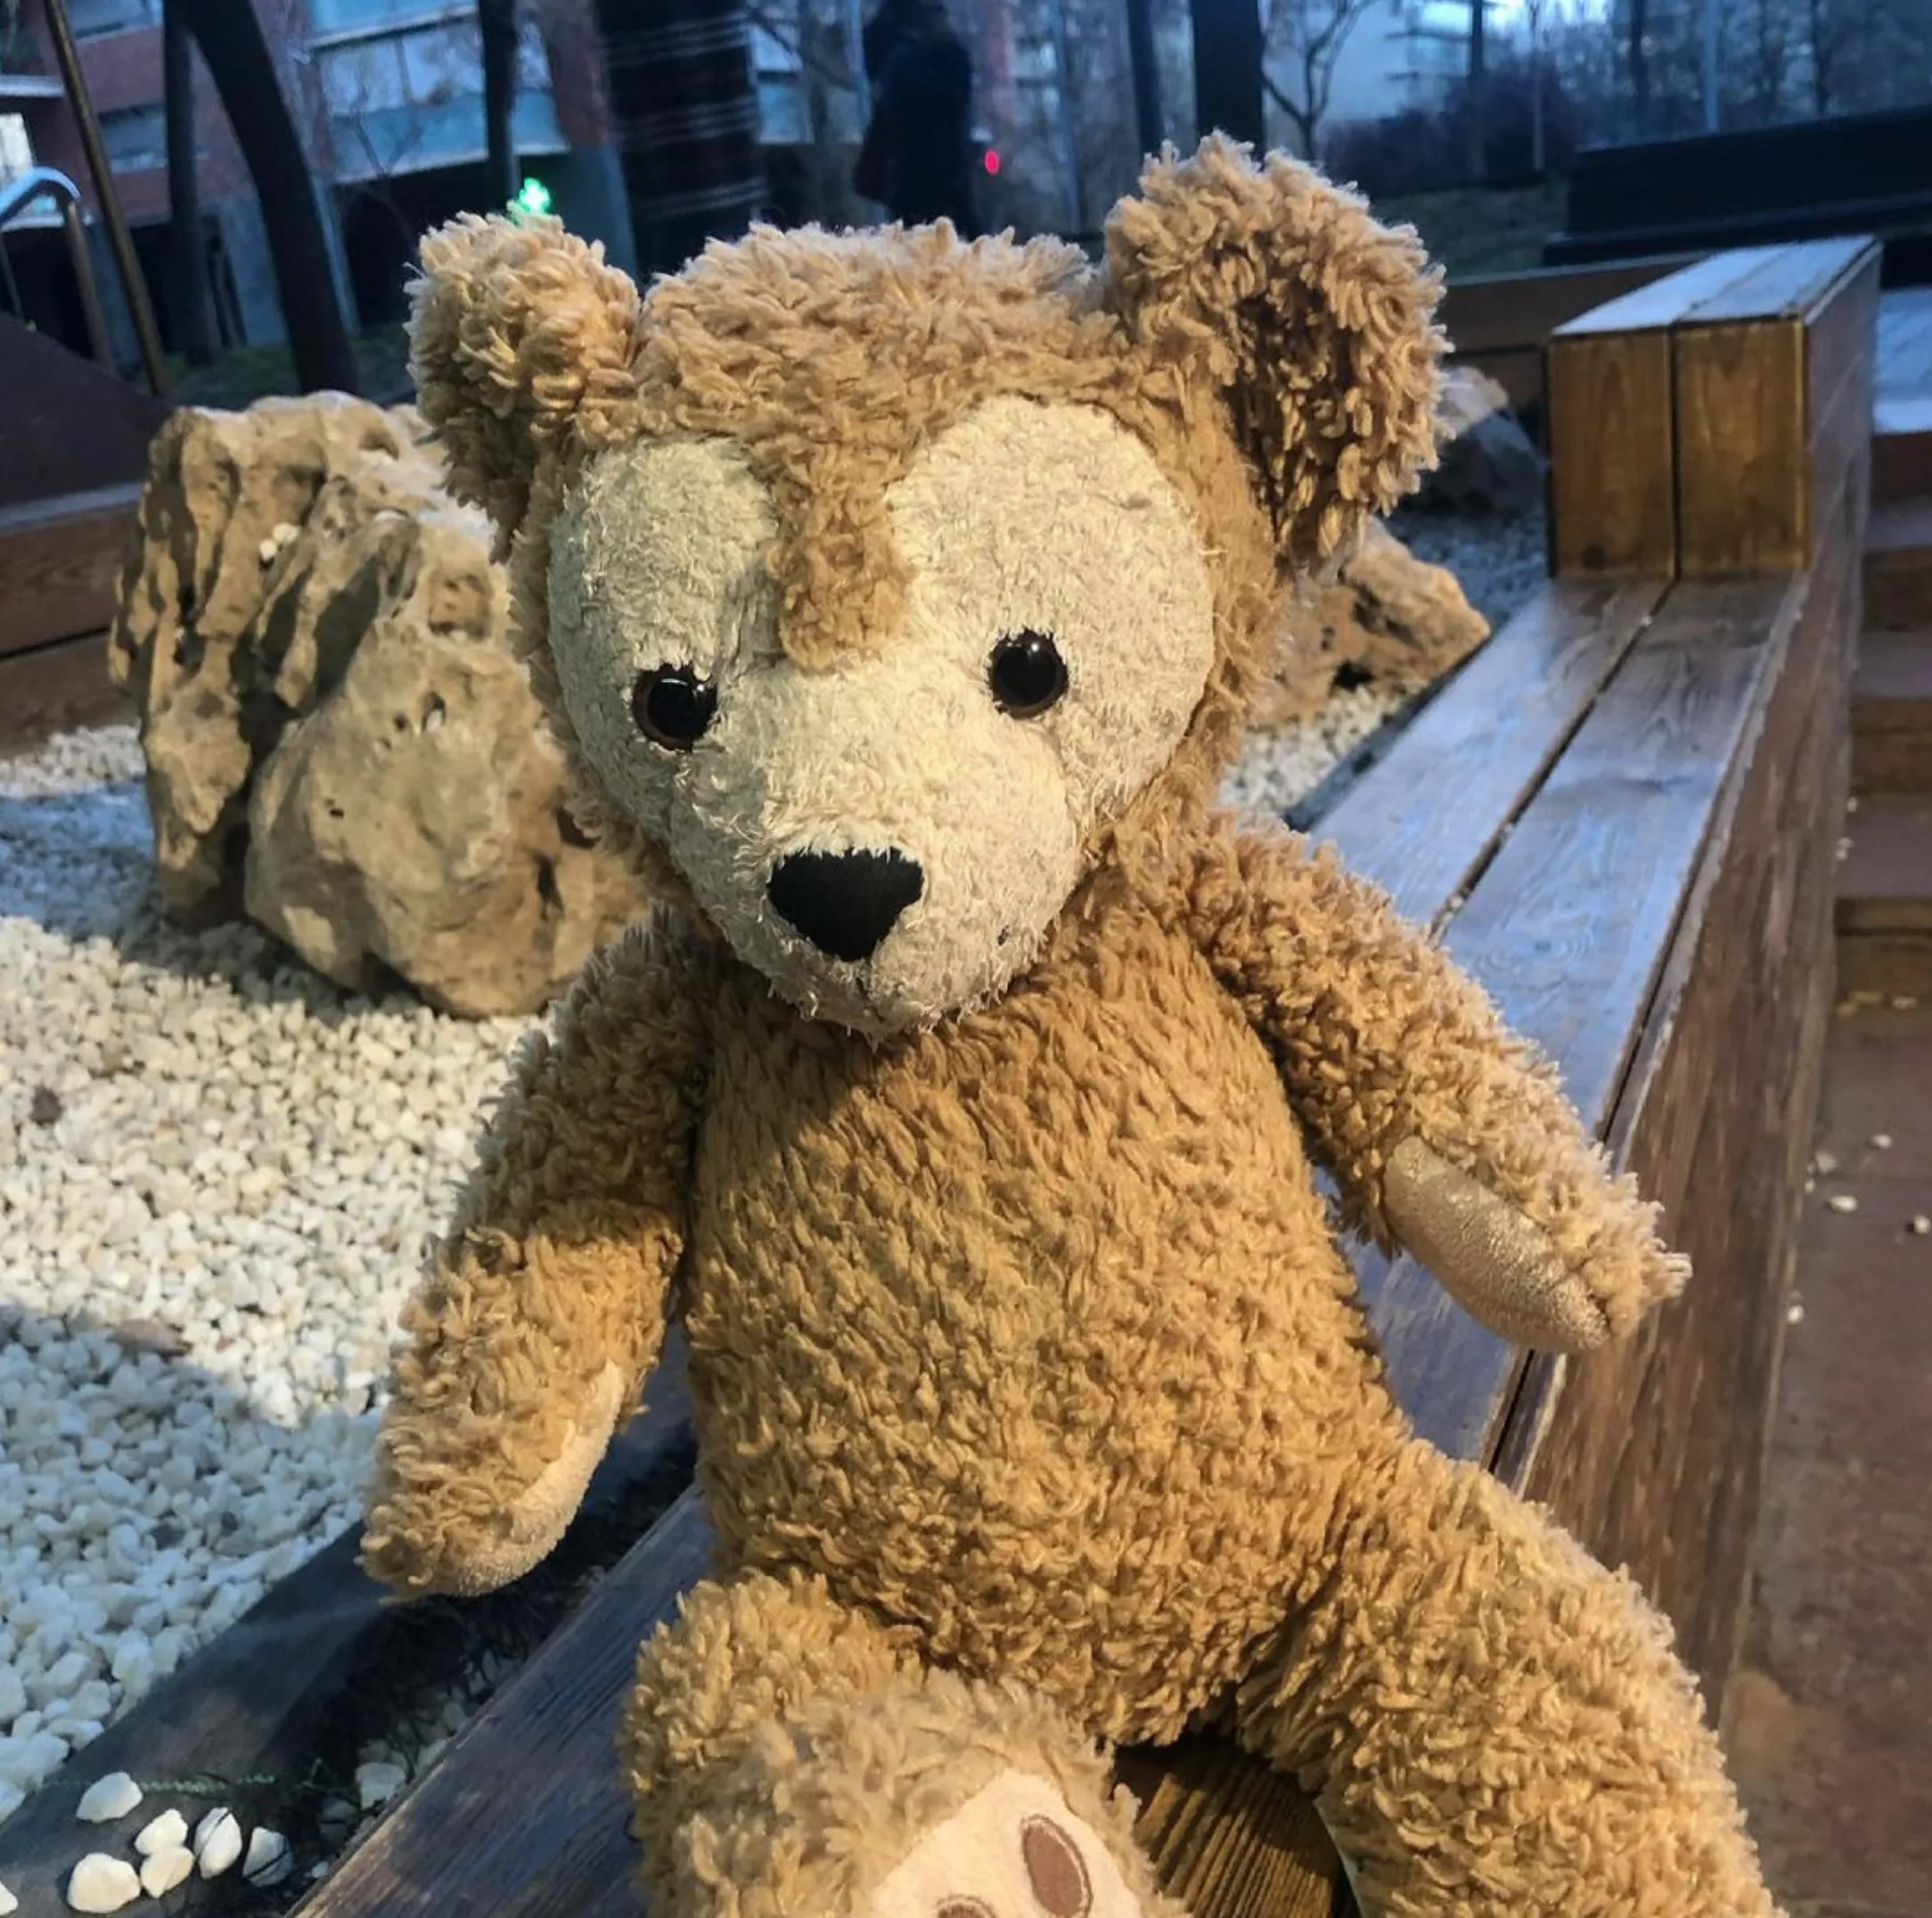 Who Is Duffy Bear? The abandoned Teddy that Dad brought home